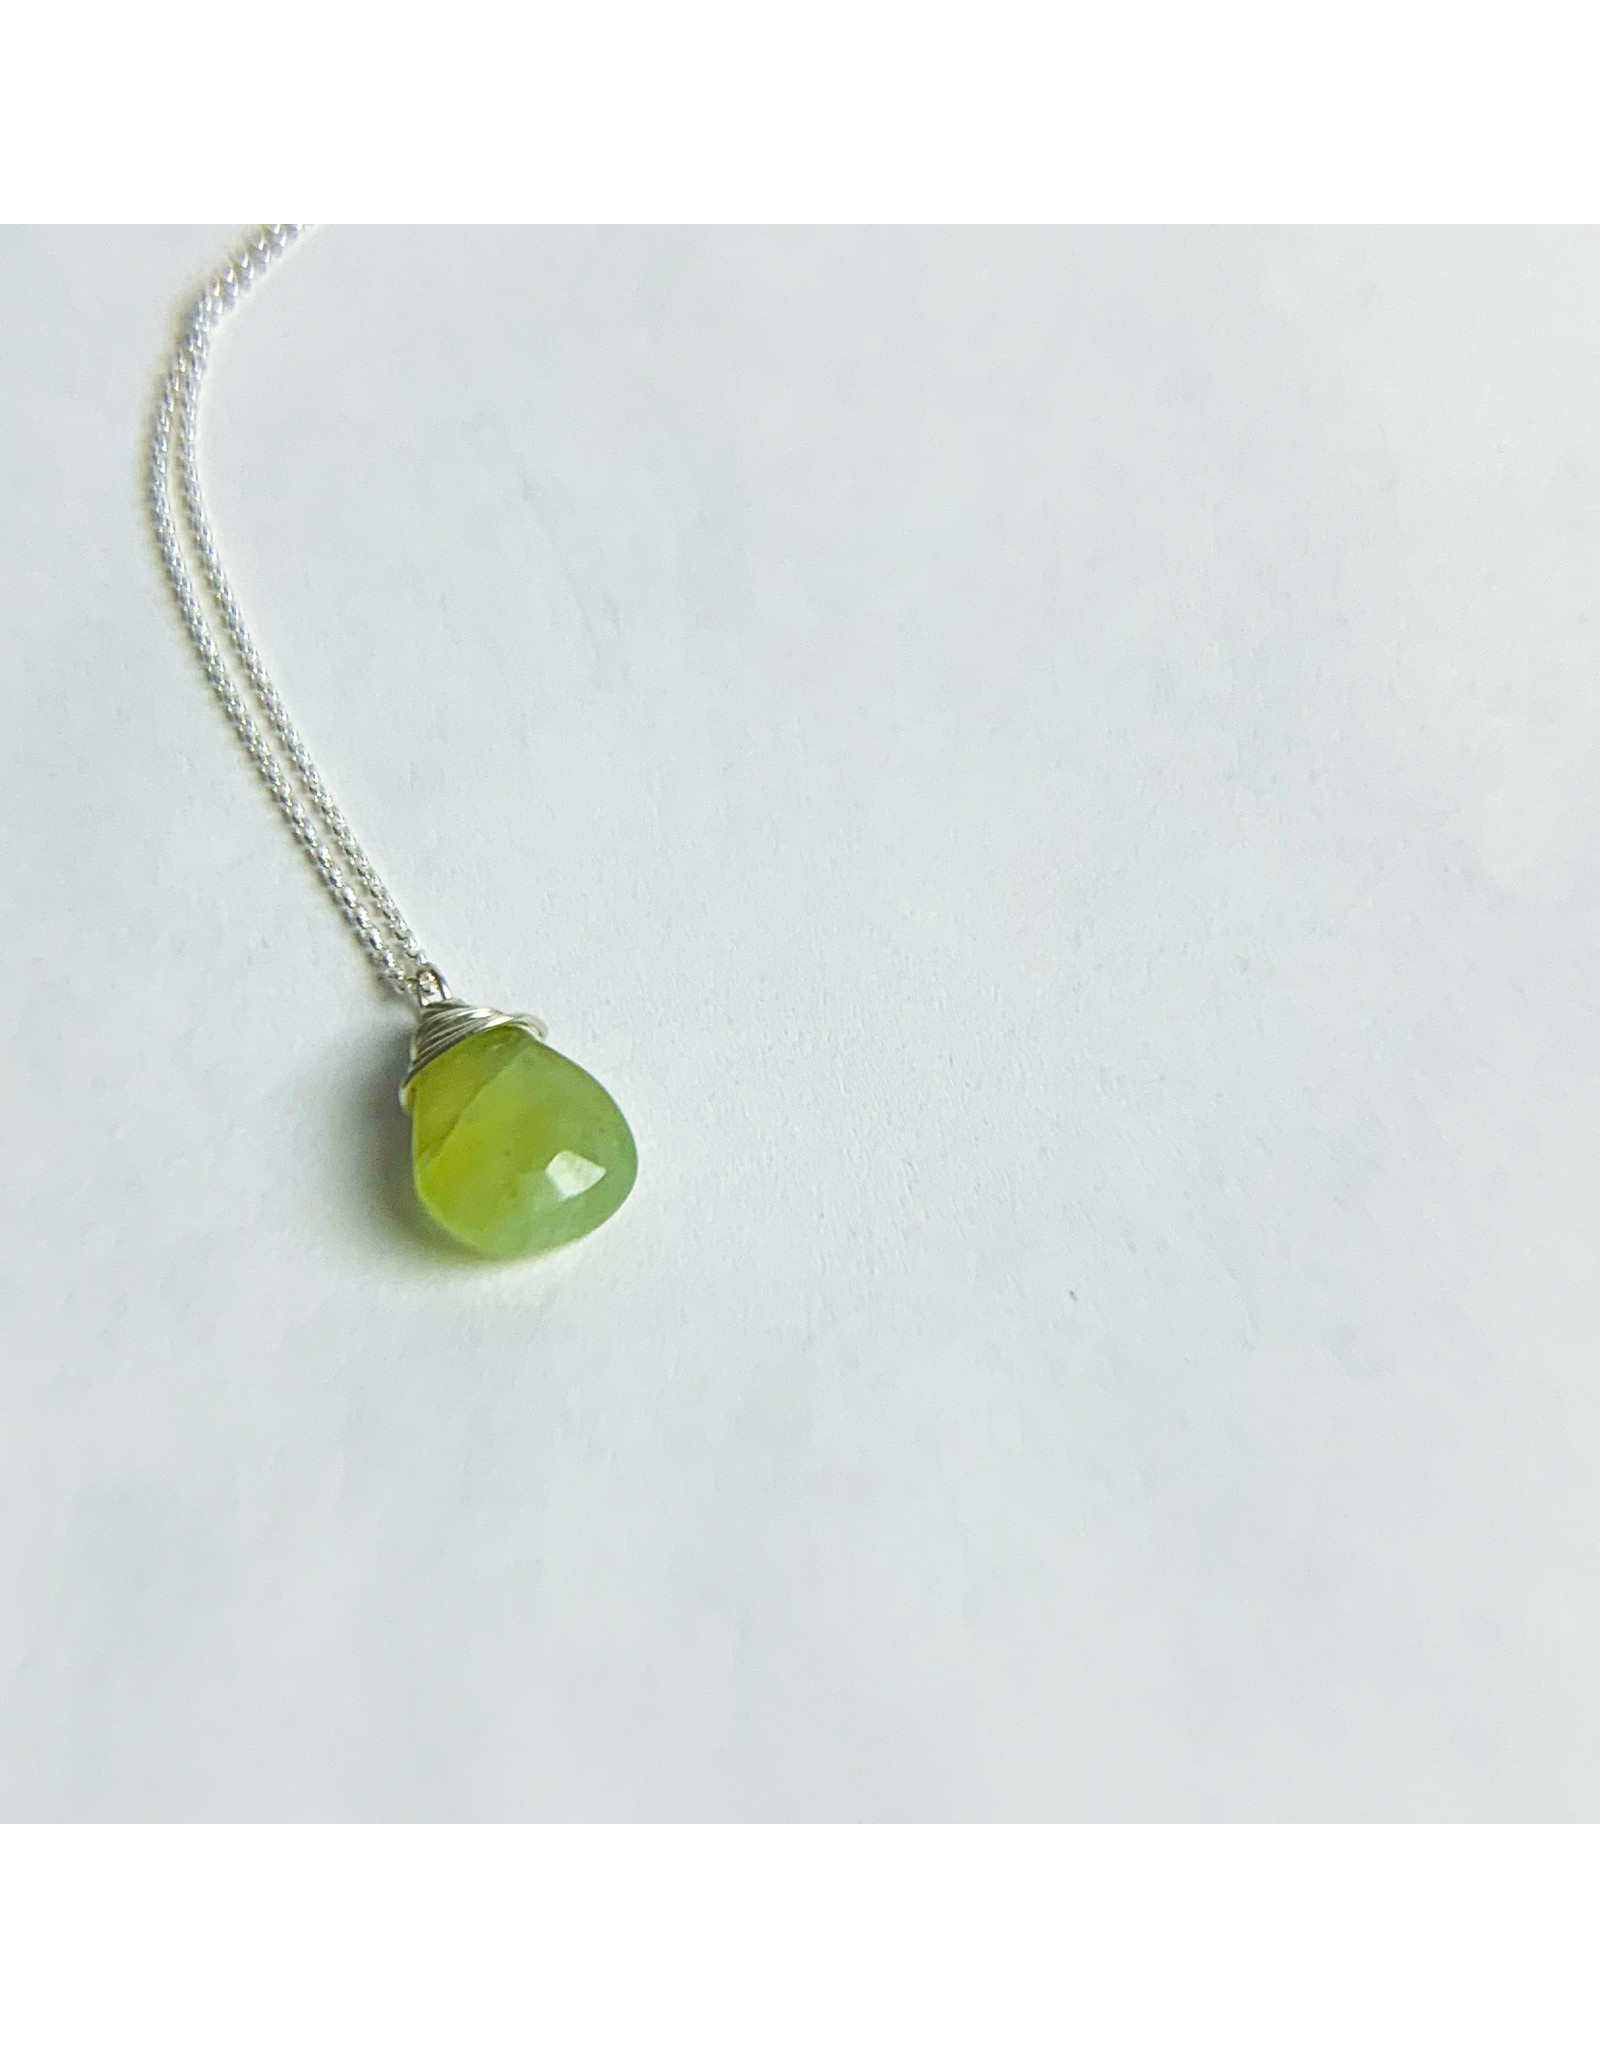 Simple Silver and Prehnite - Consignment